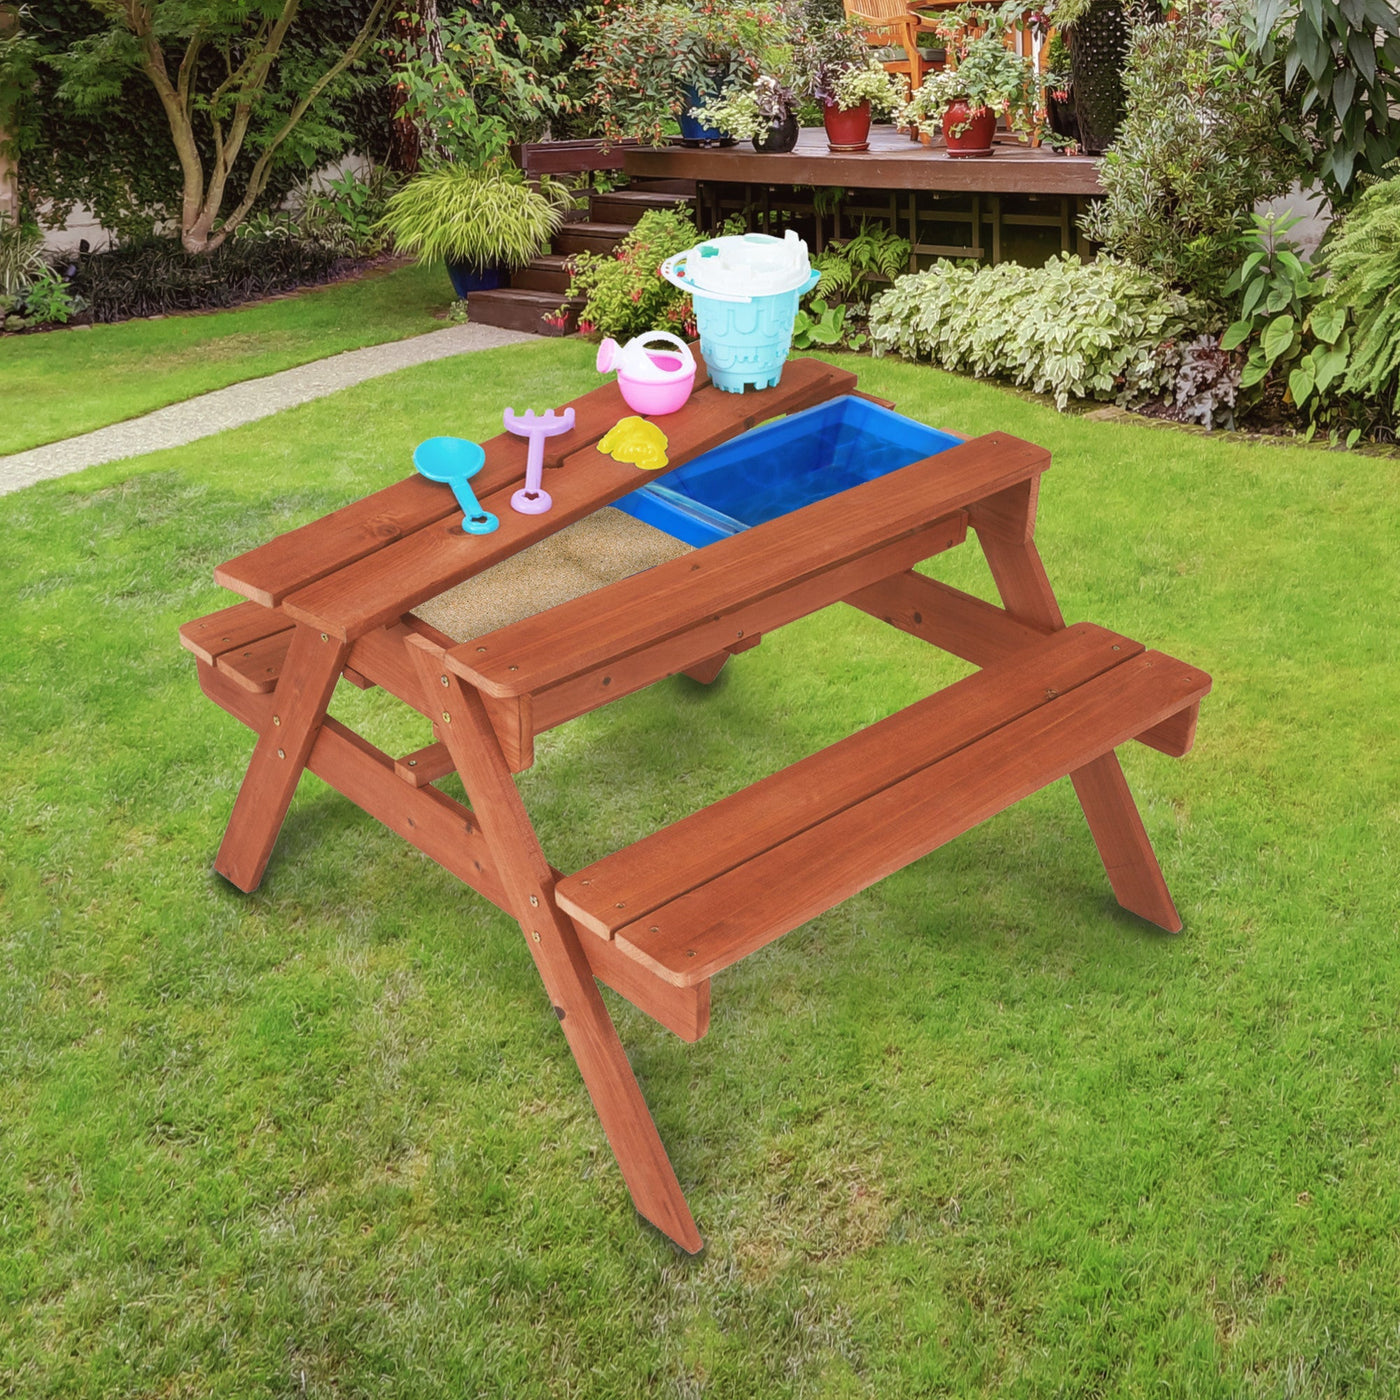 Teamson Kids Outdoor Wooden Picnic Table with 2 Sensory Bins for Sand/Water Play Plus Accessories, Warm Cherry